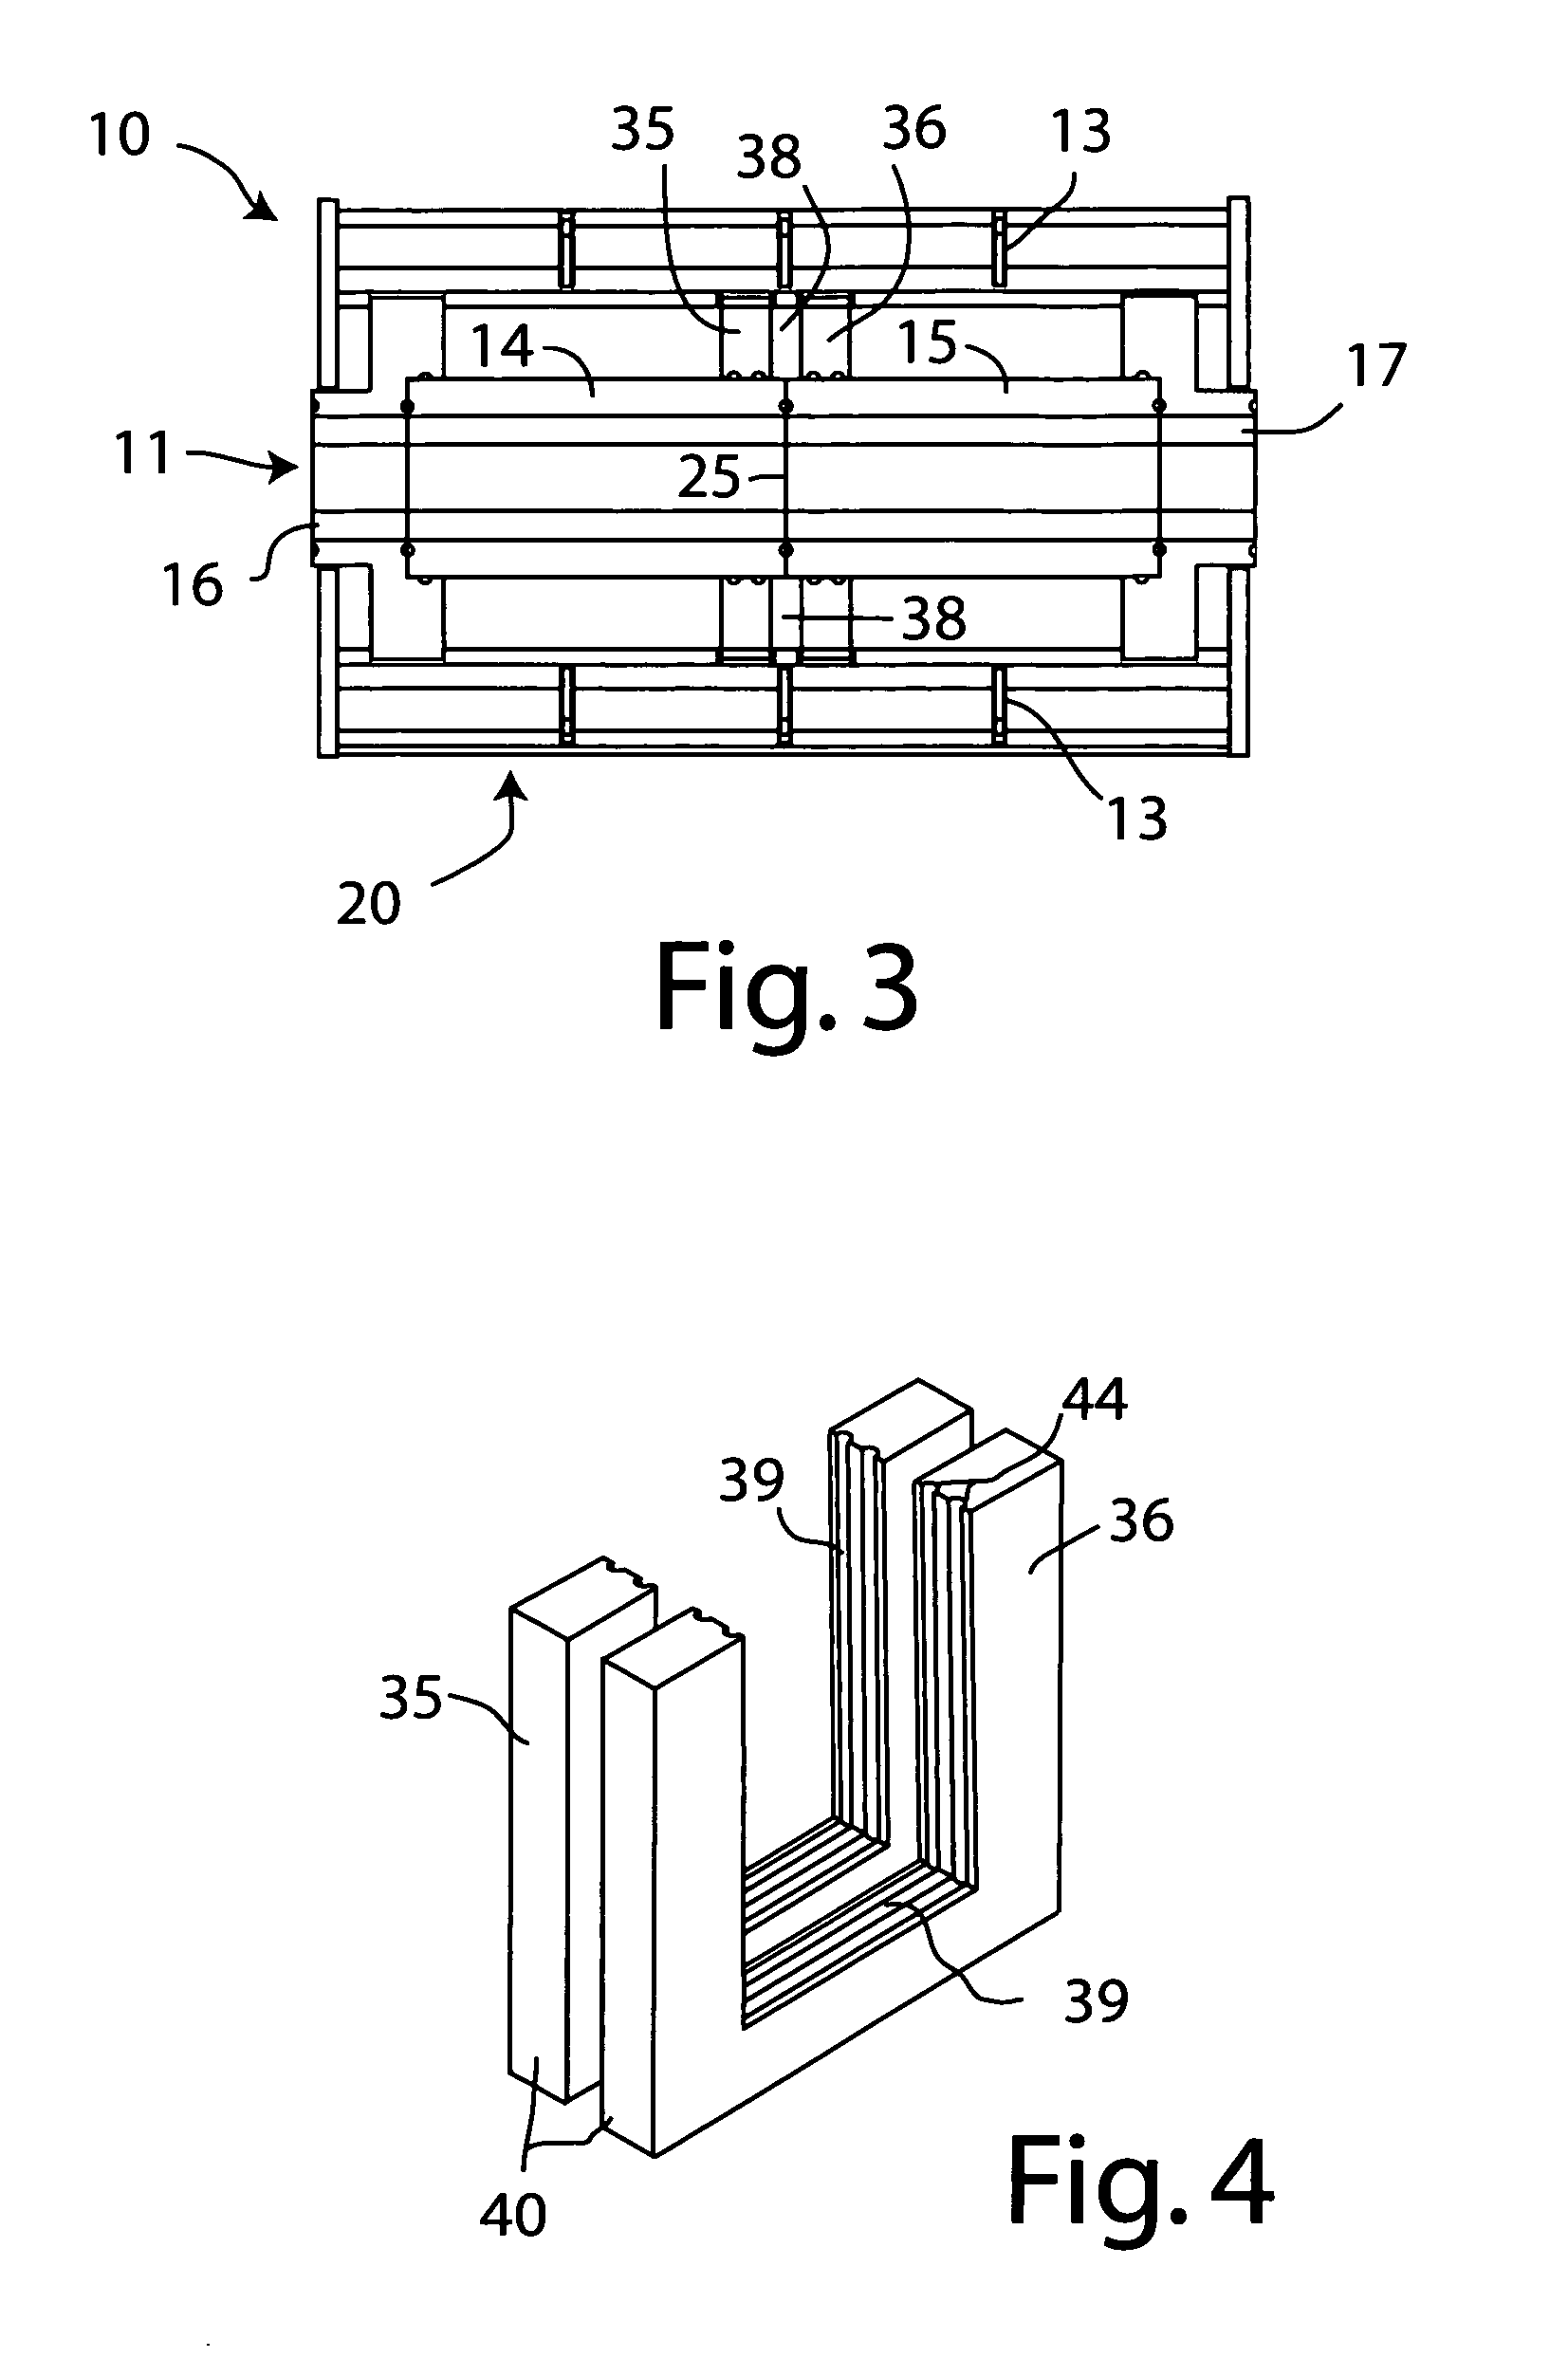 Molten metal leakege confinement and thernal optimization in vessels used for containing molten metal